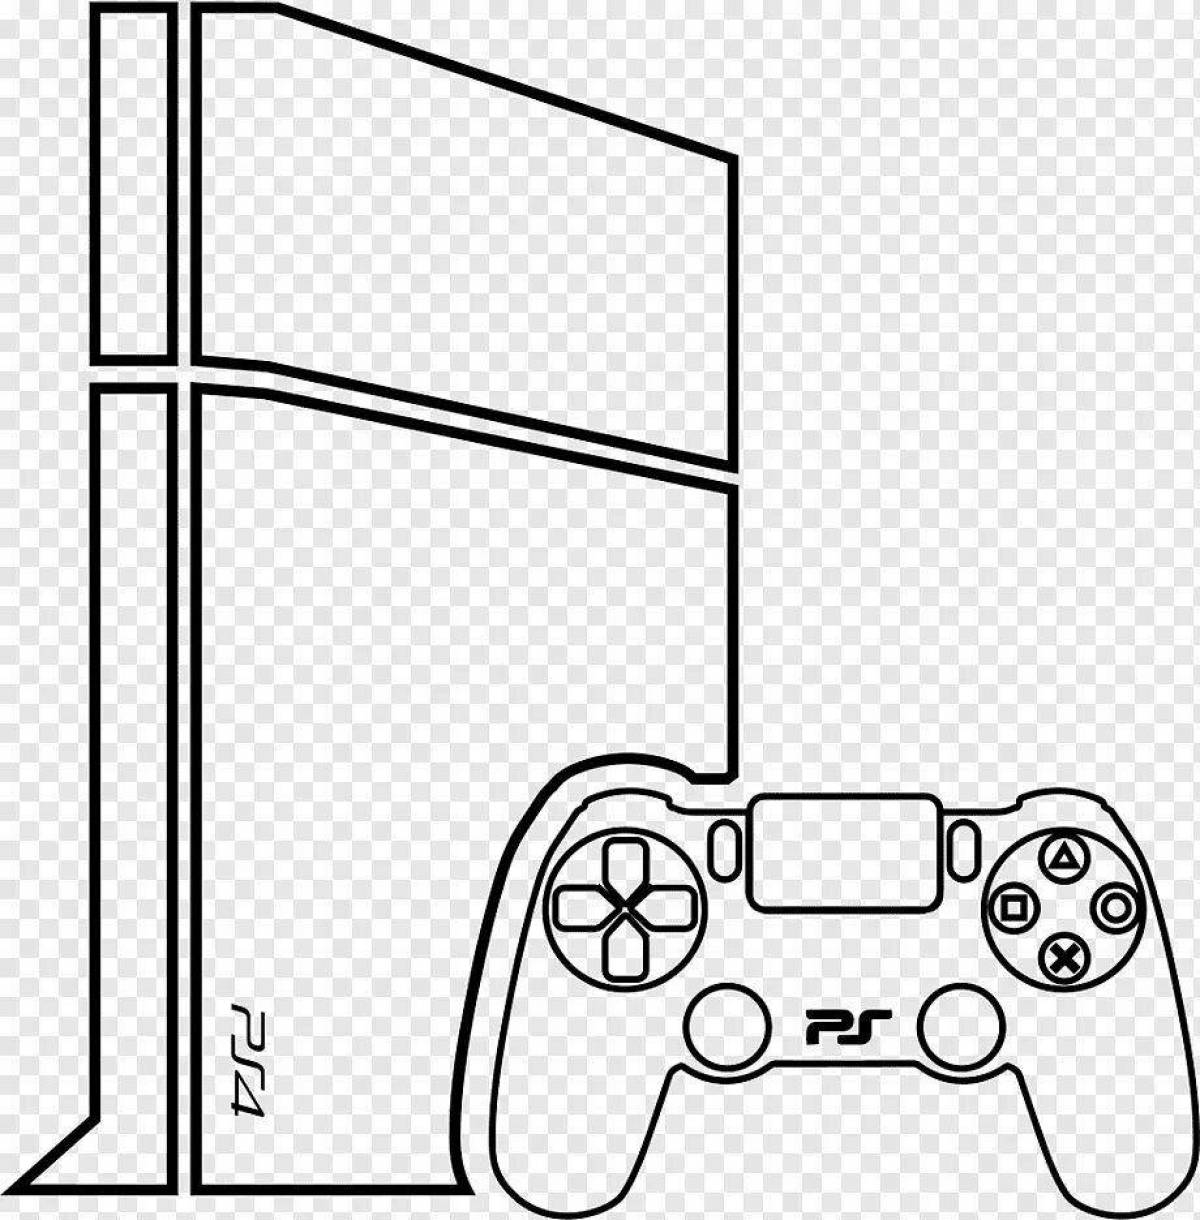 Playstation awesome coloring book